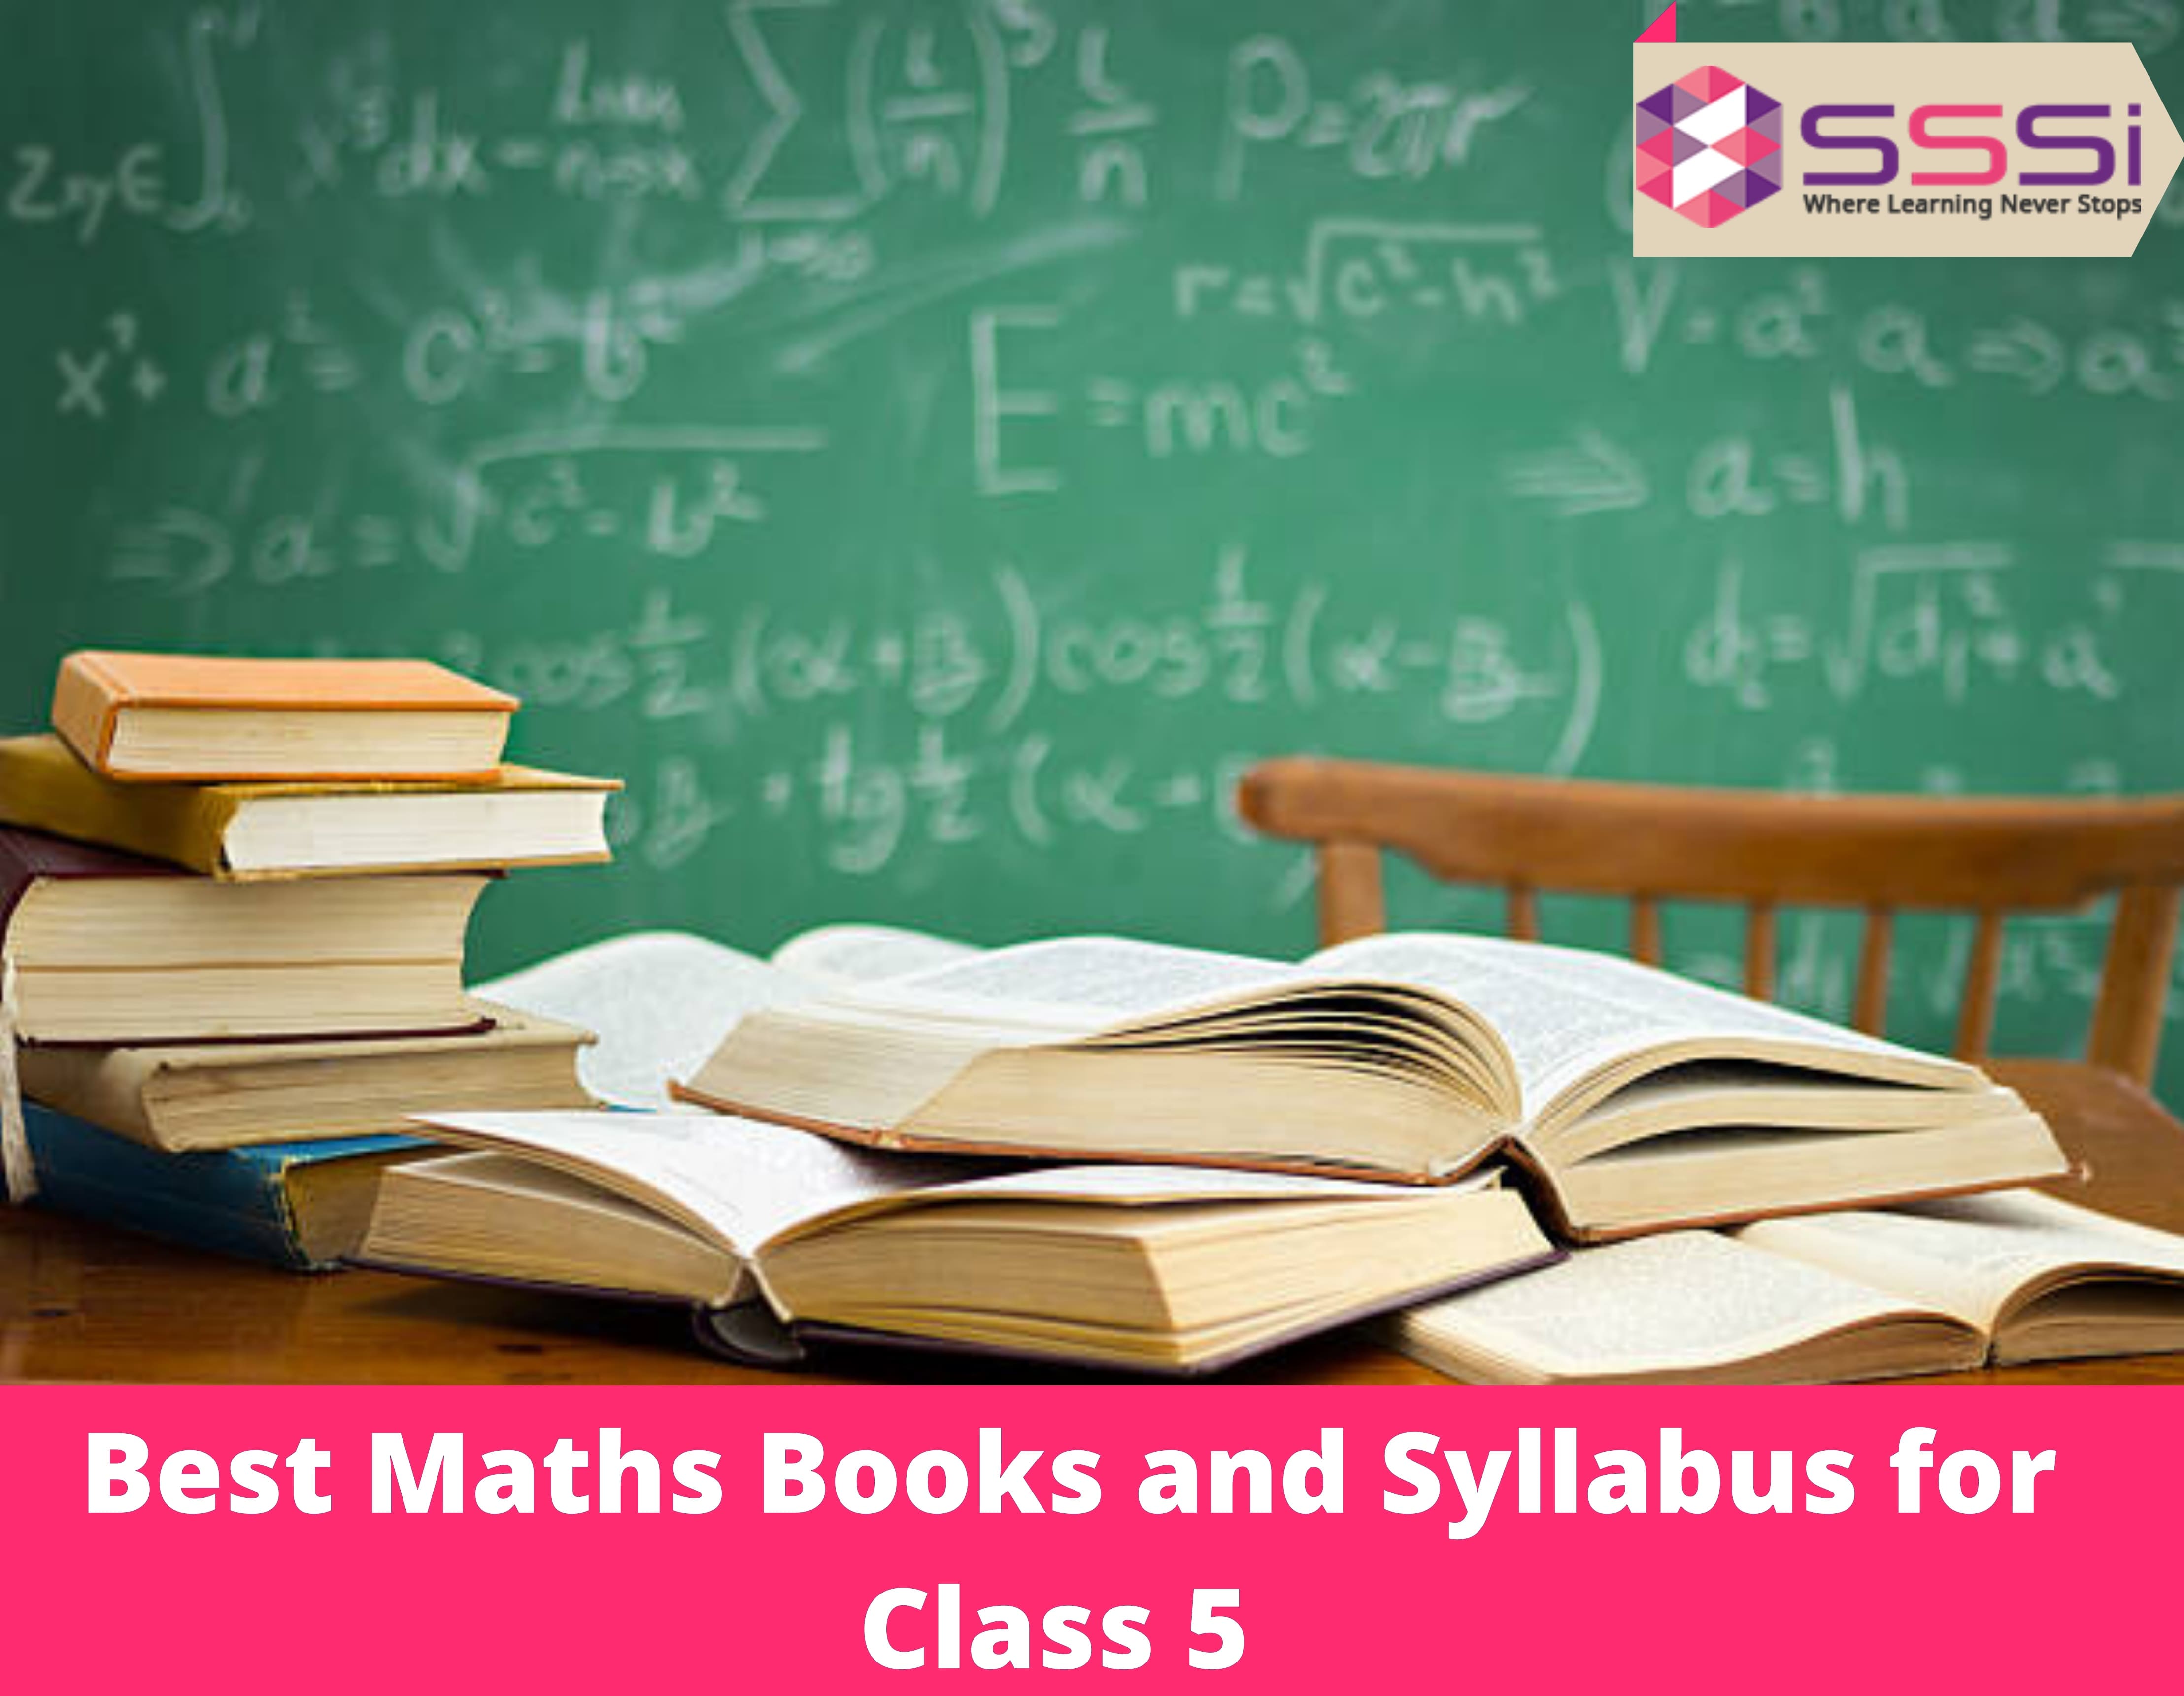 Maths Books and Syllabus For Class 5 